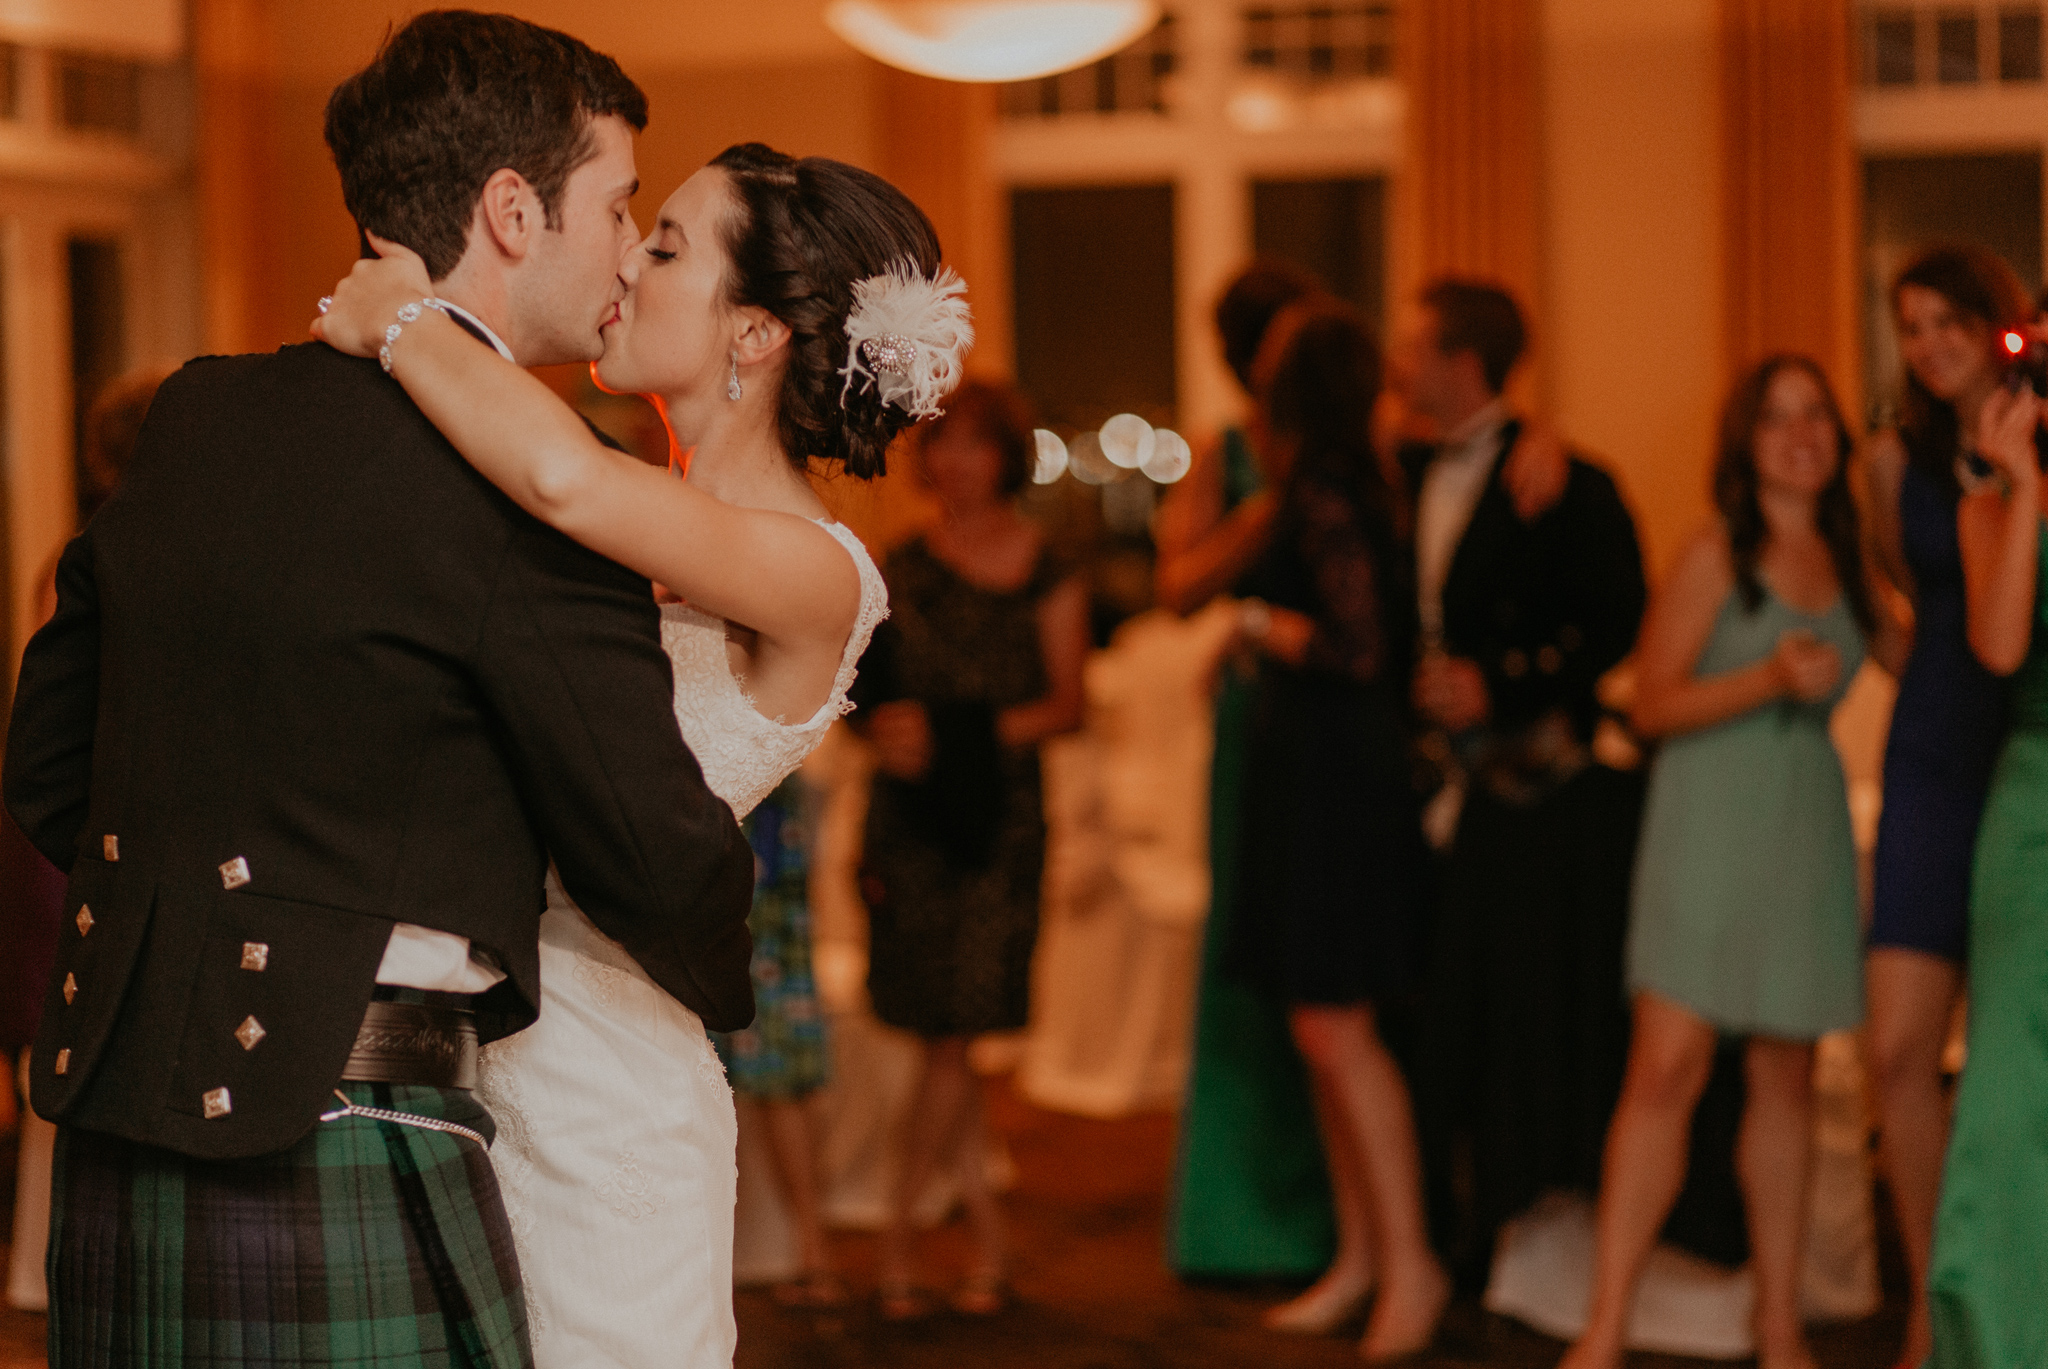 Candid photo of bride and groom kissing during first dance documentary wedding picture